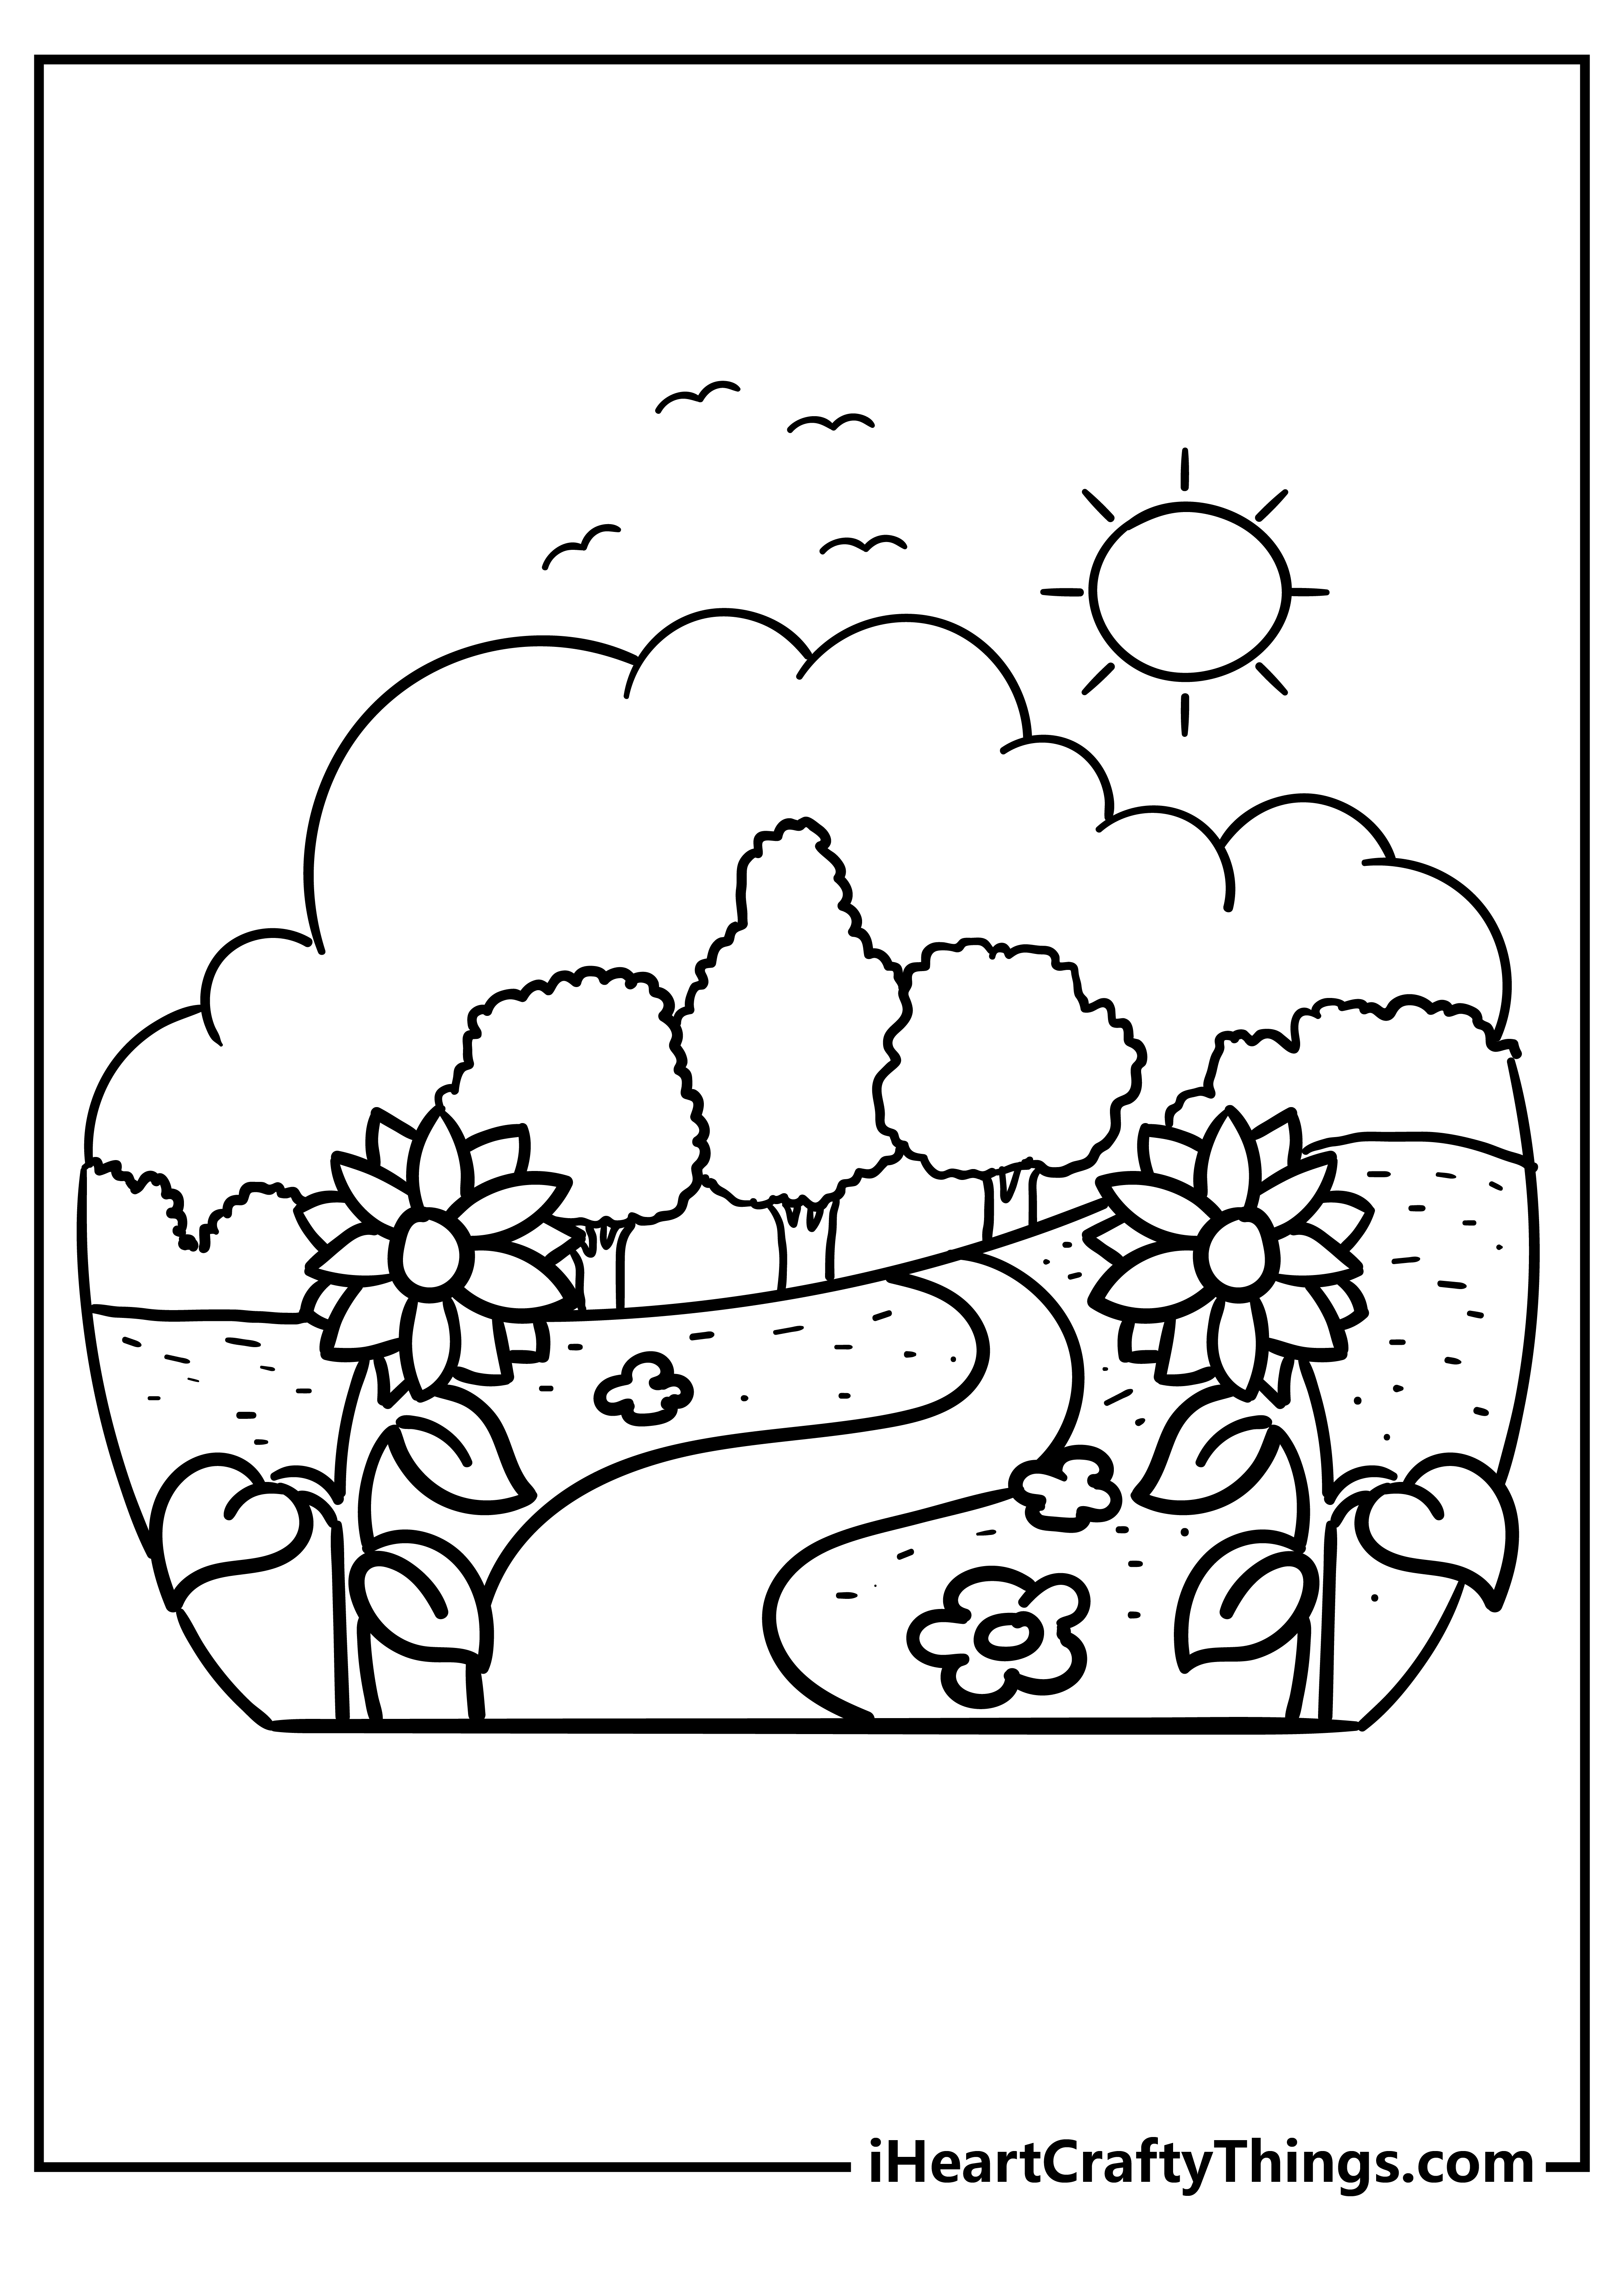 Nature Easy Coloring Pages